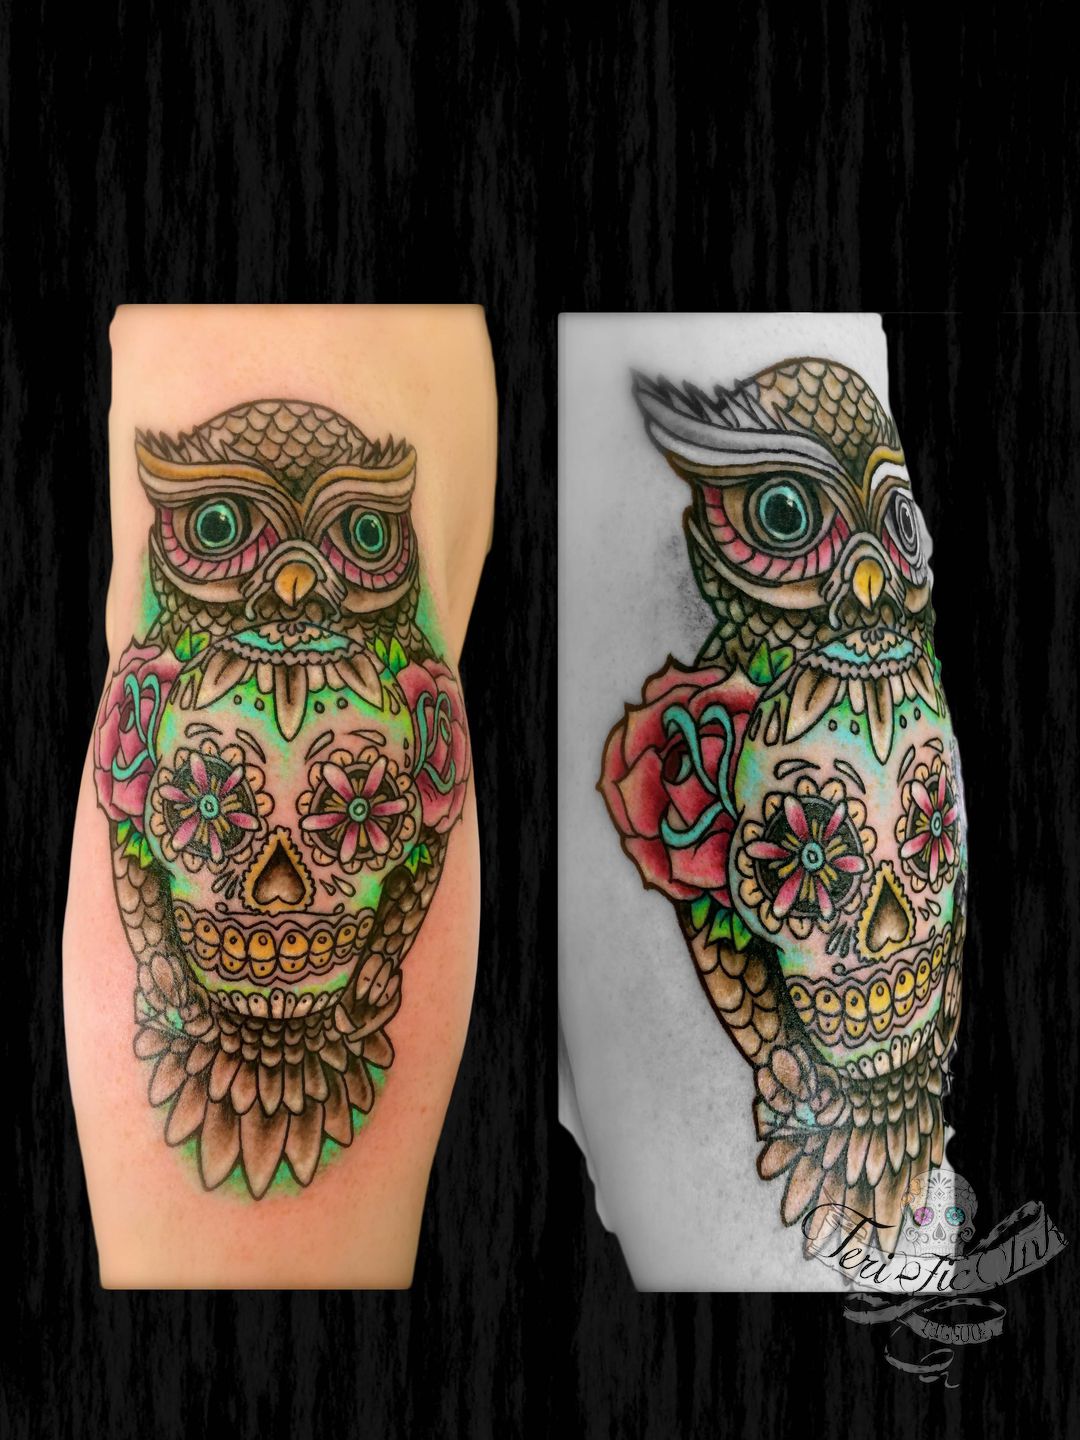 Tattoo uploaded by Laura Sumares  dreamtattoo  I would love the Ami  version of an owl sugar skull In love with this Fingers crossed  blackwork owl sugarskull  Tattoodo